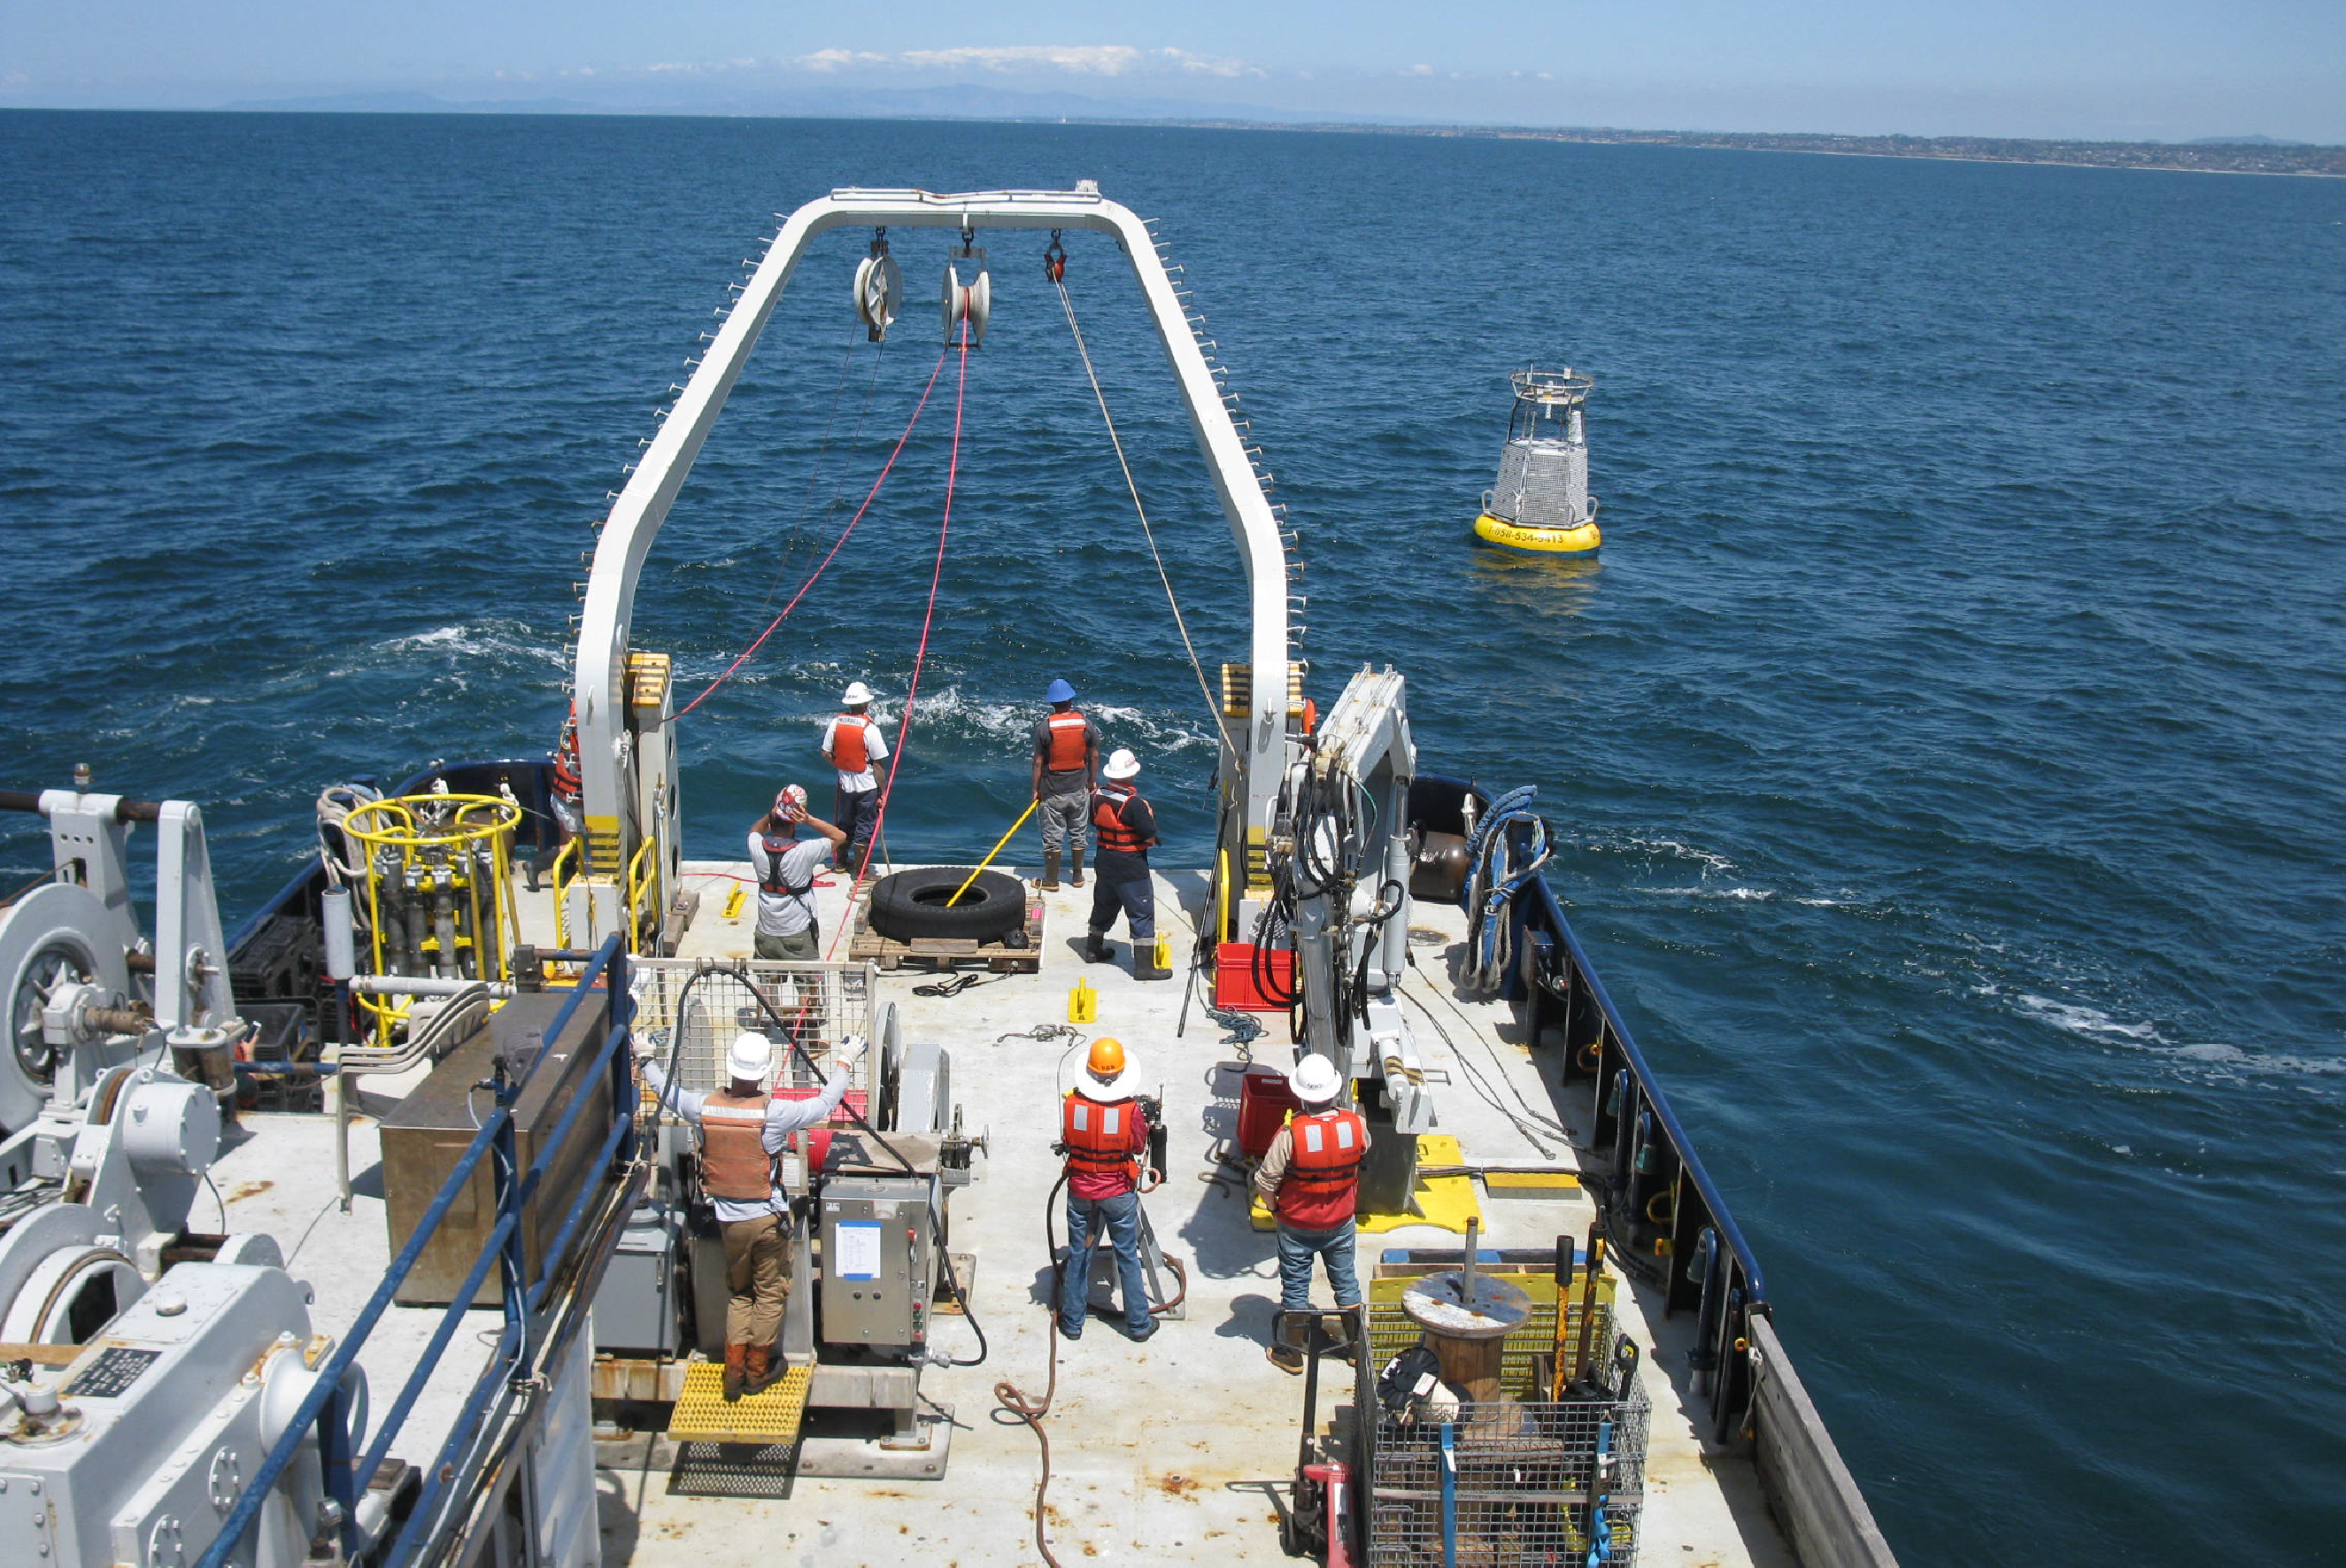 A crew of engineers, scientists, and students prepare to recover the Del Mar mooring in 2017 for routine maintenance